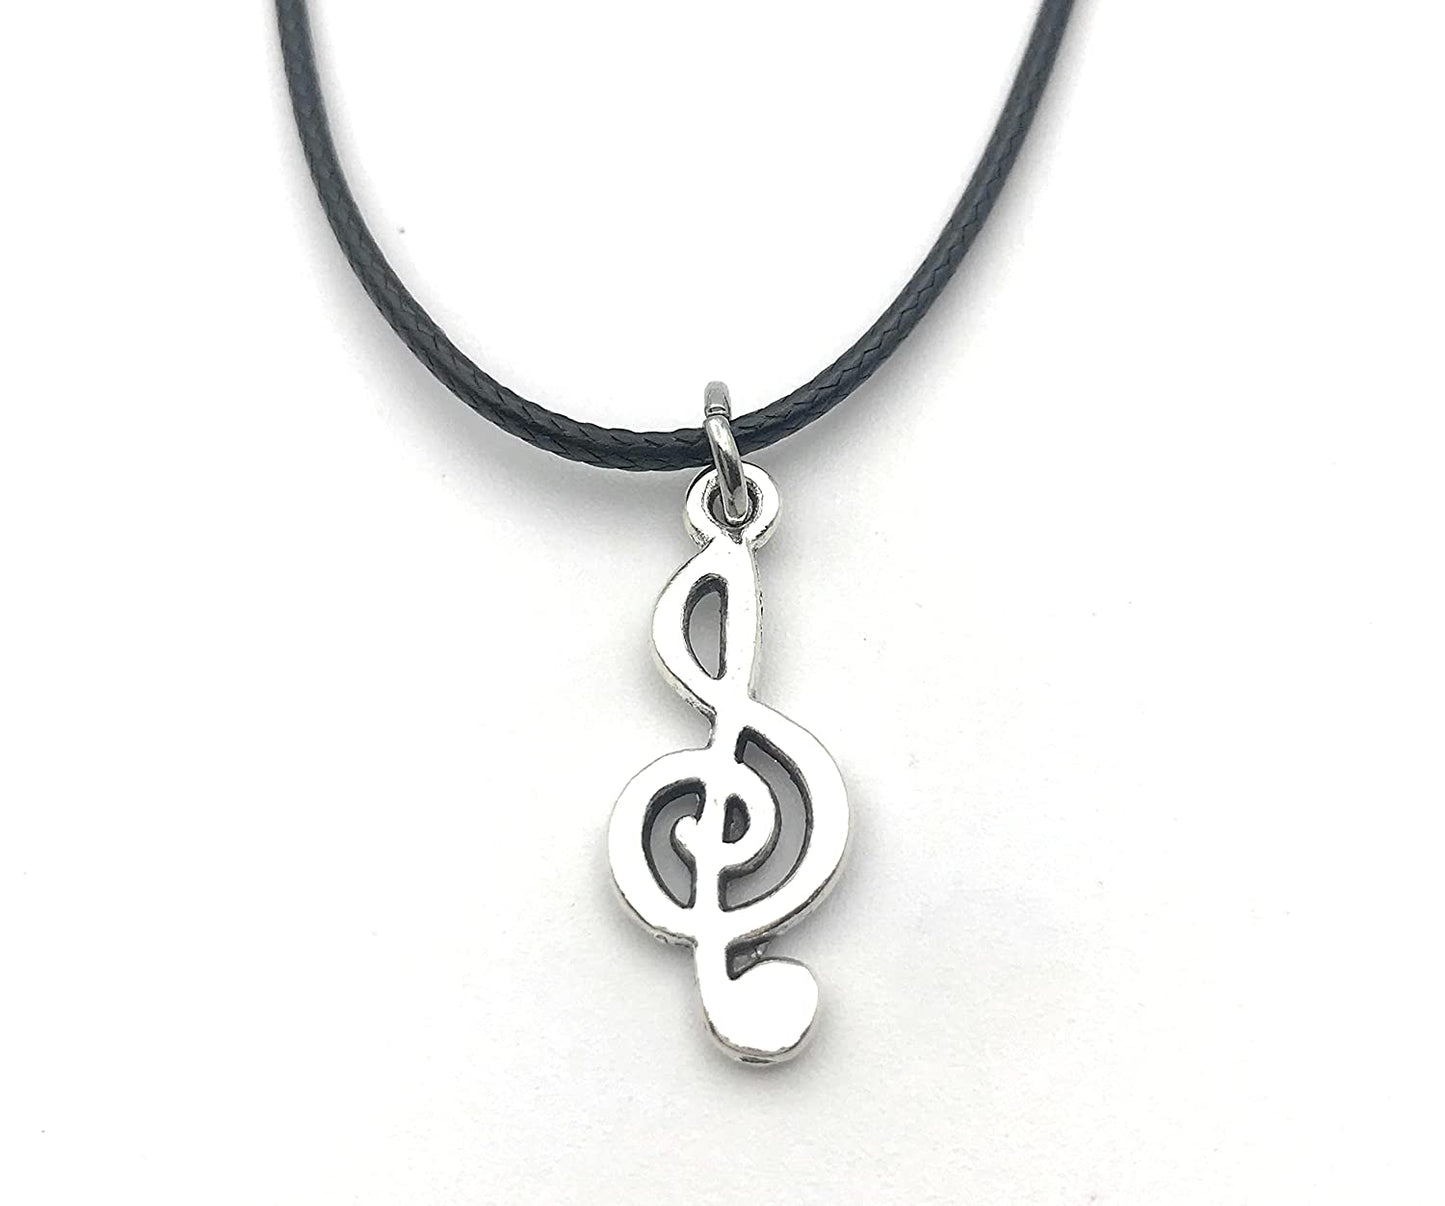 Treble G Clef Necklace from Scott D Jewelry Designs